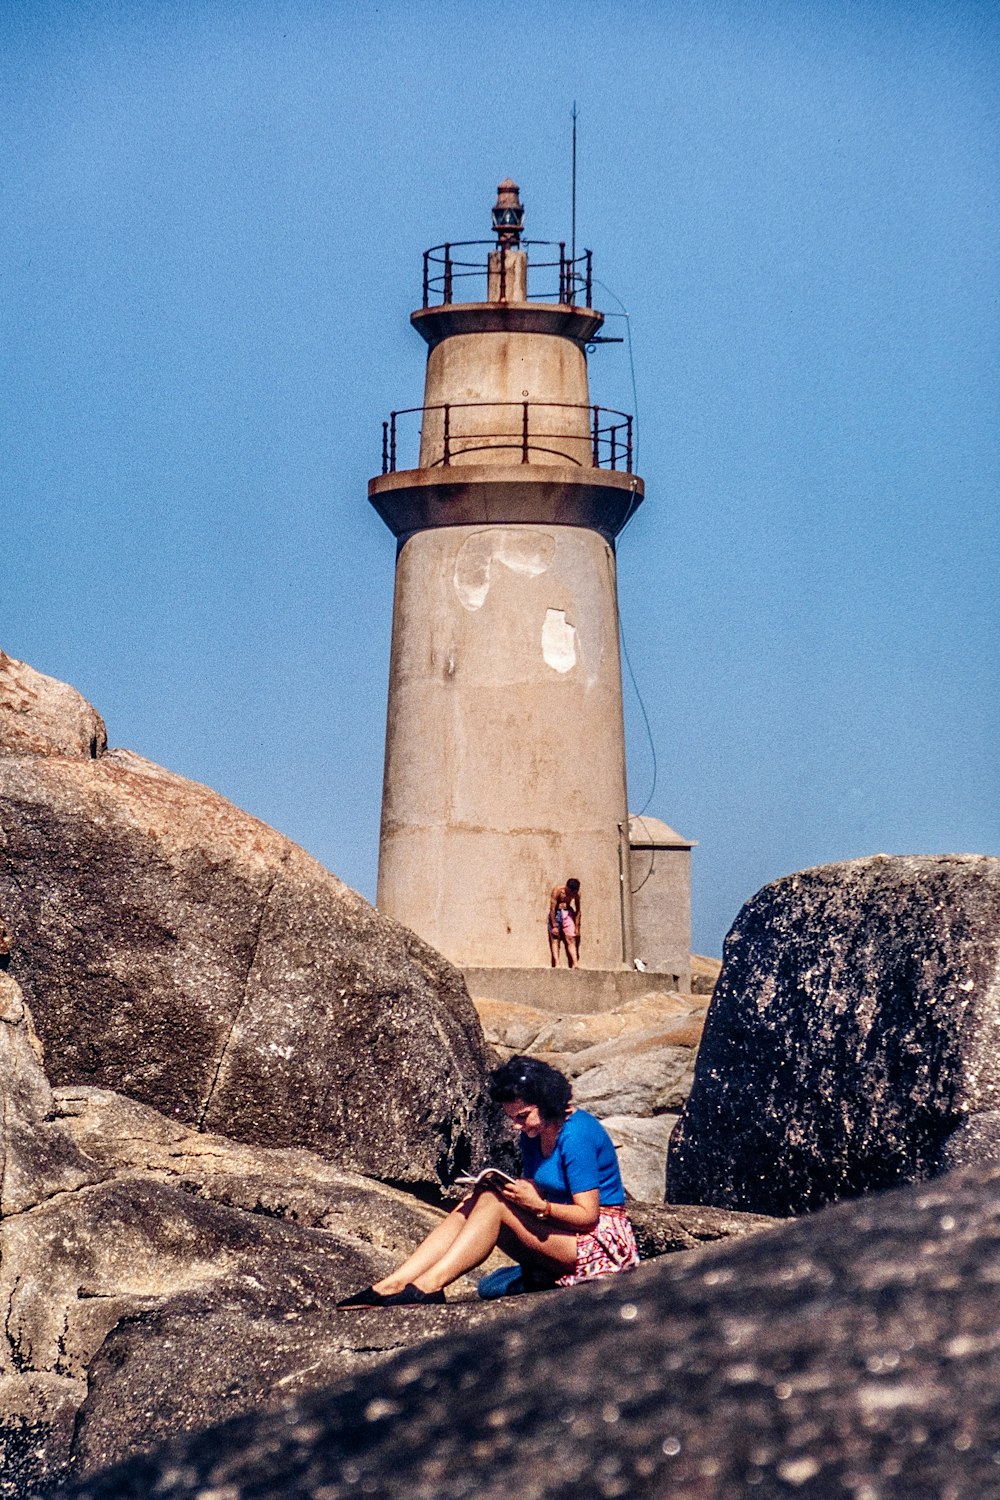 woman in blue shirt sitting on rock near white lighthouse under blue sky during daytime